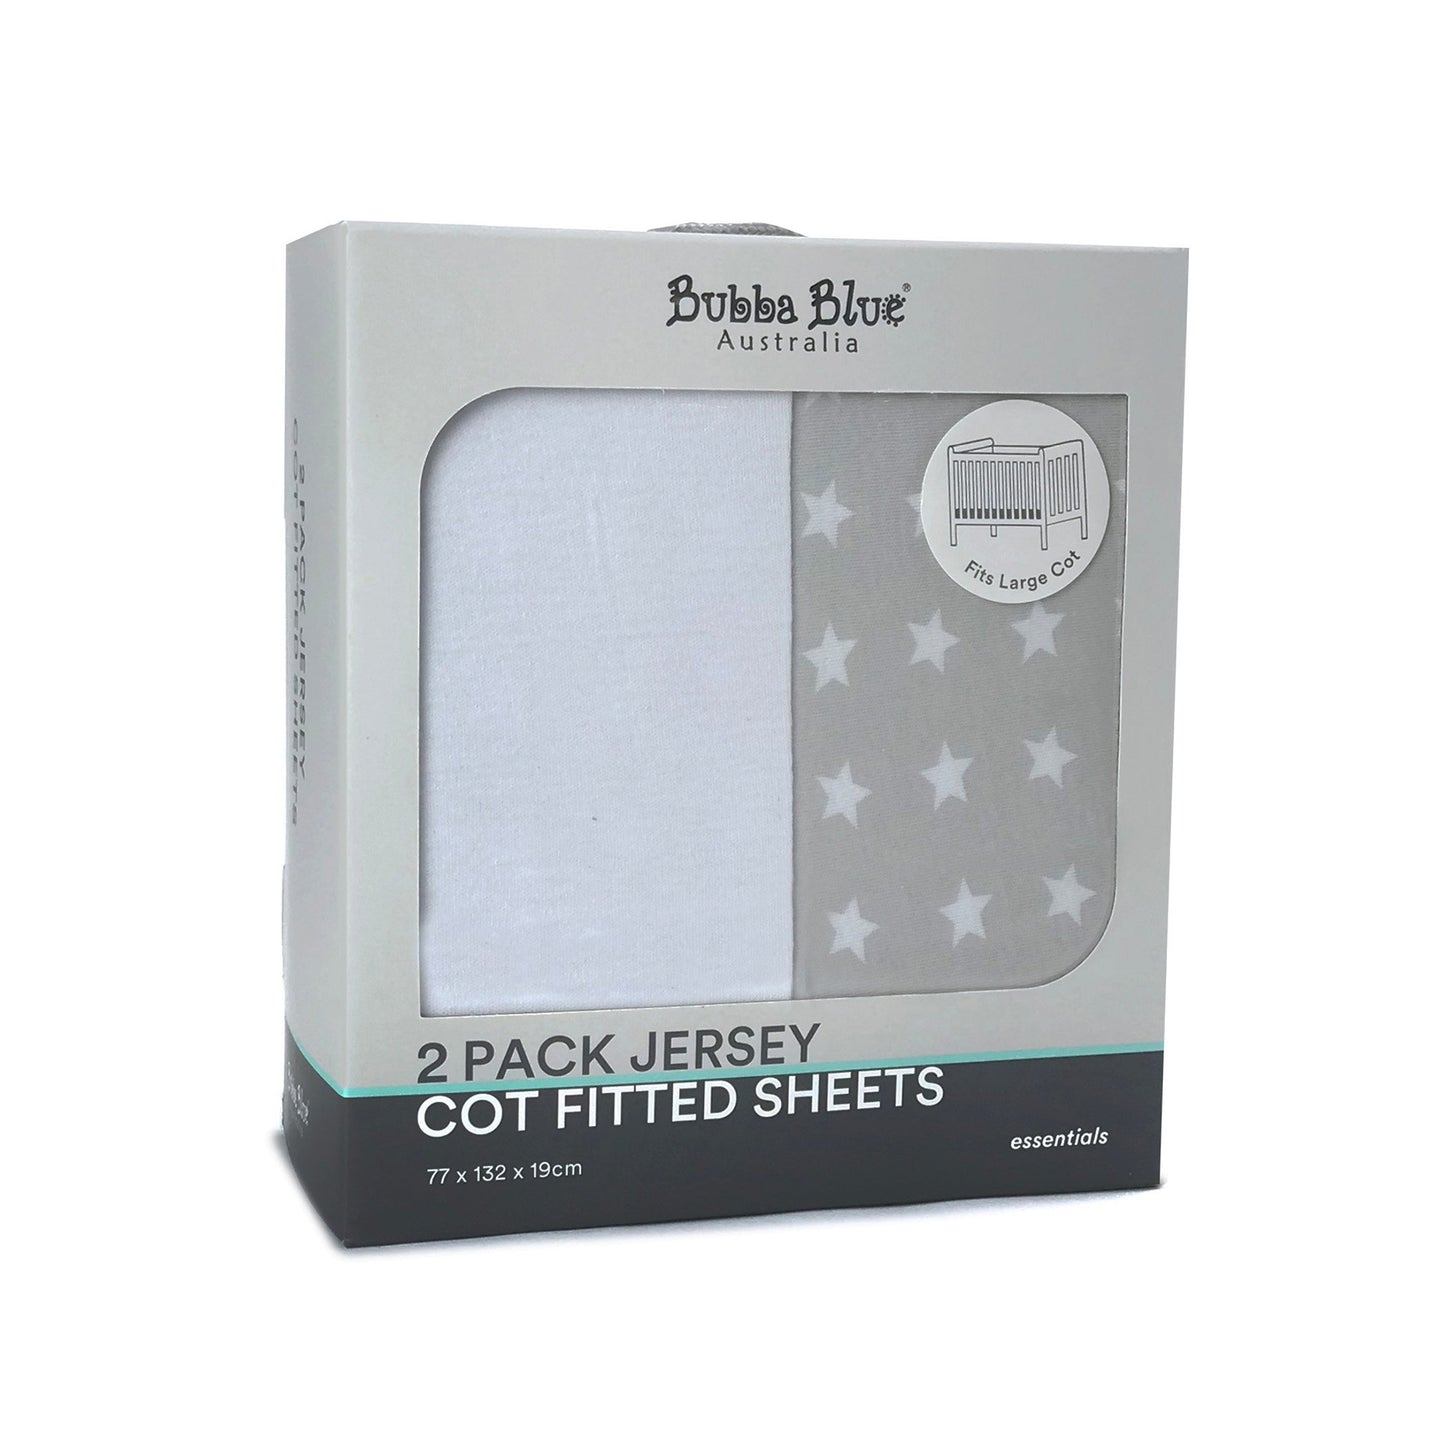 Bubba Blue Essentials 2 pk Jersey Cot Fitted Sheet